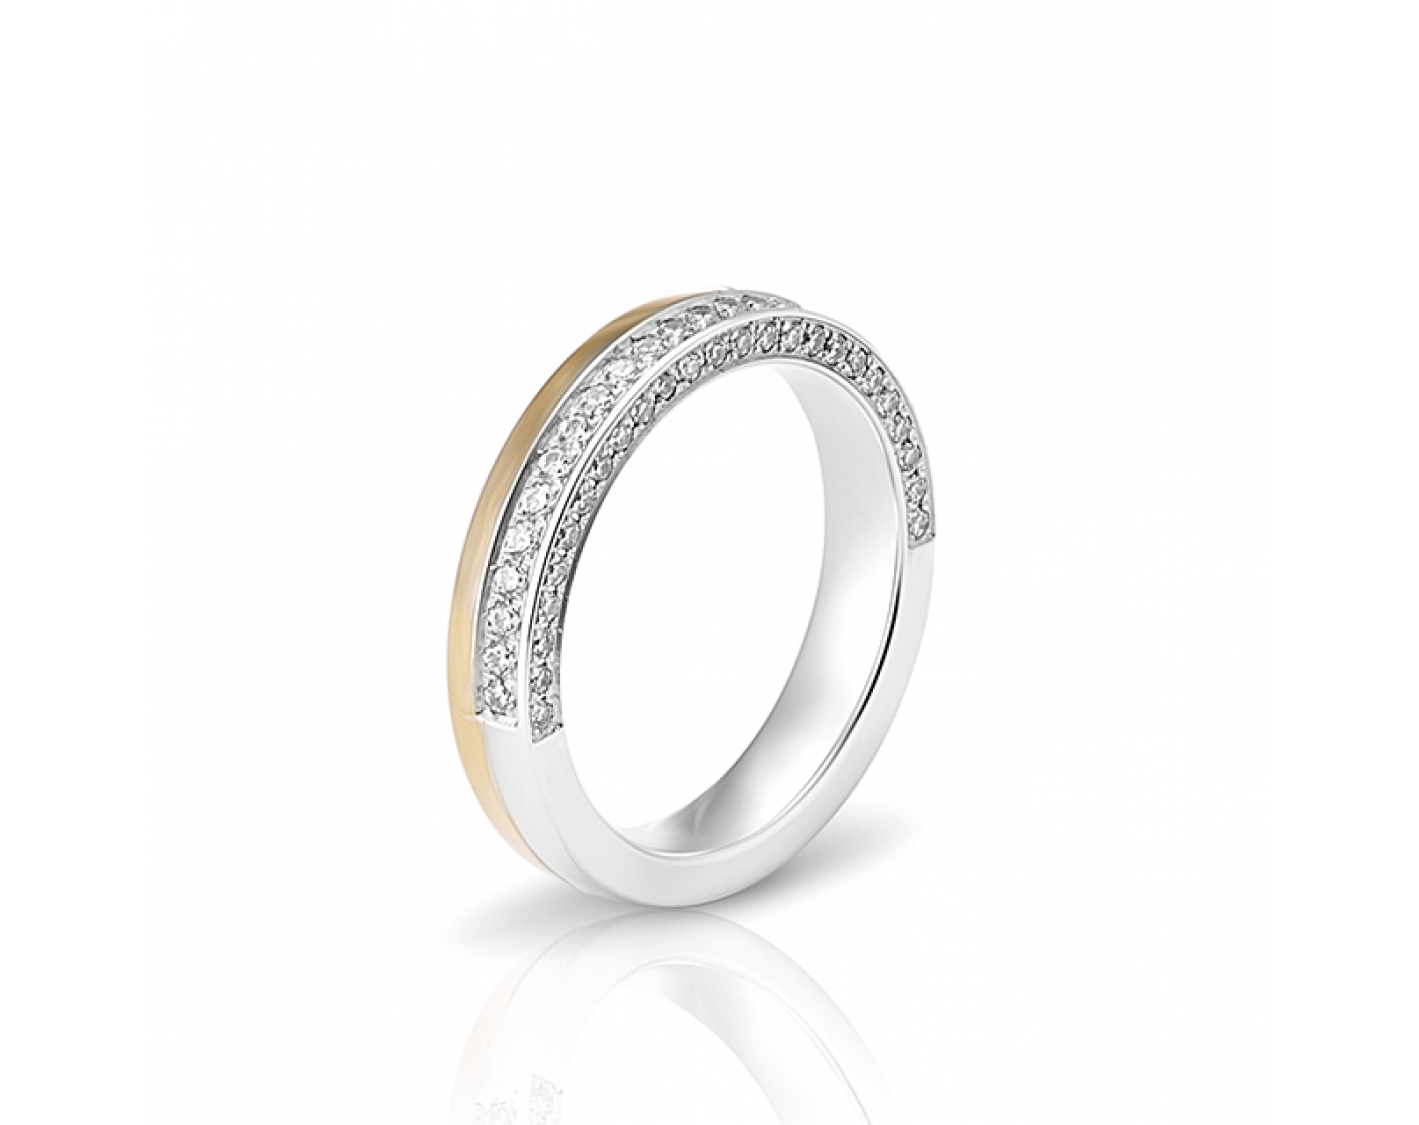 dual-tone 4mm two-toned* half eternity wedding band Photos & images